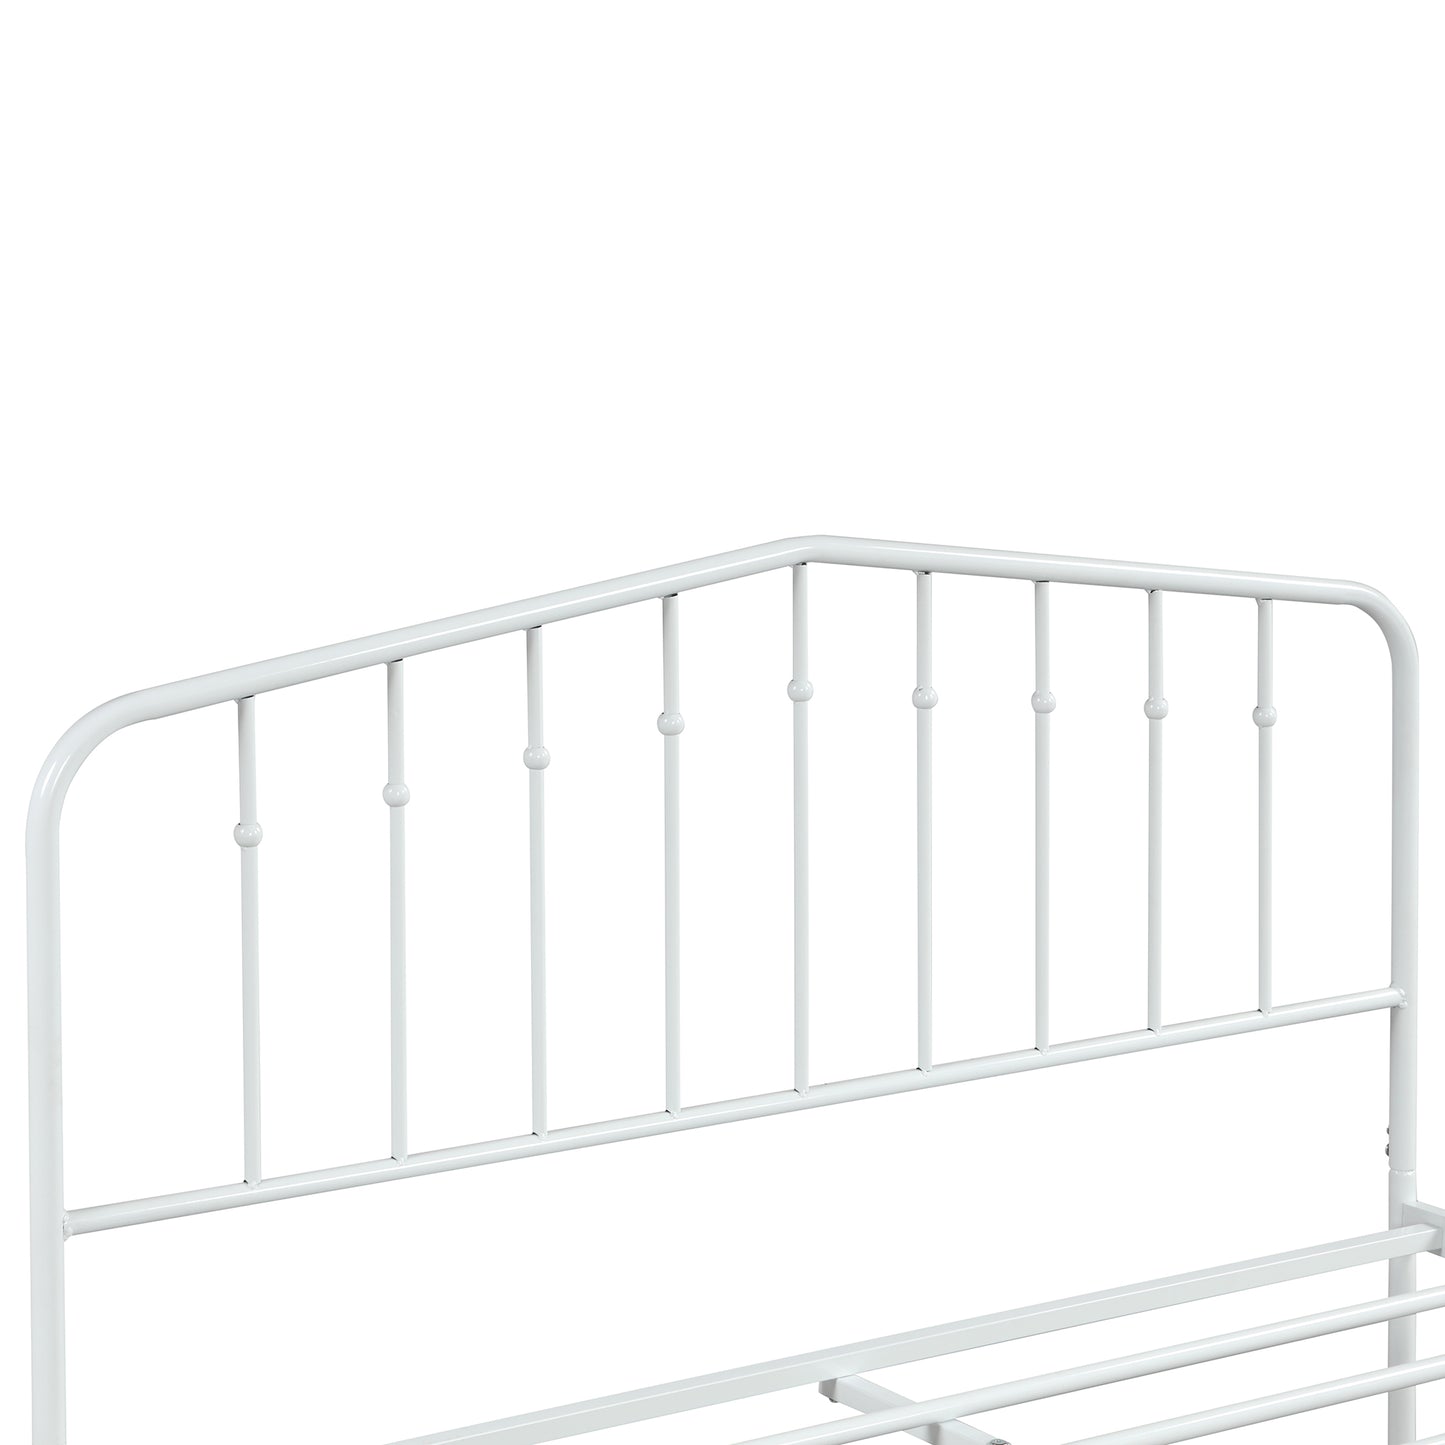 White Full Bed Frame, Metal Platform Bed with Headboard and Heavy Duty Slats for Bedroom Guest Room Dorm